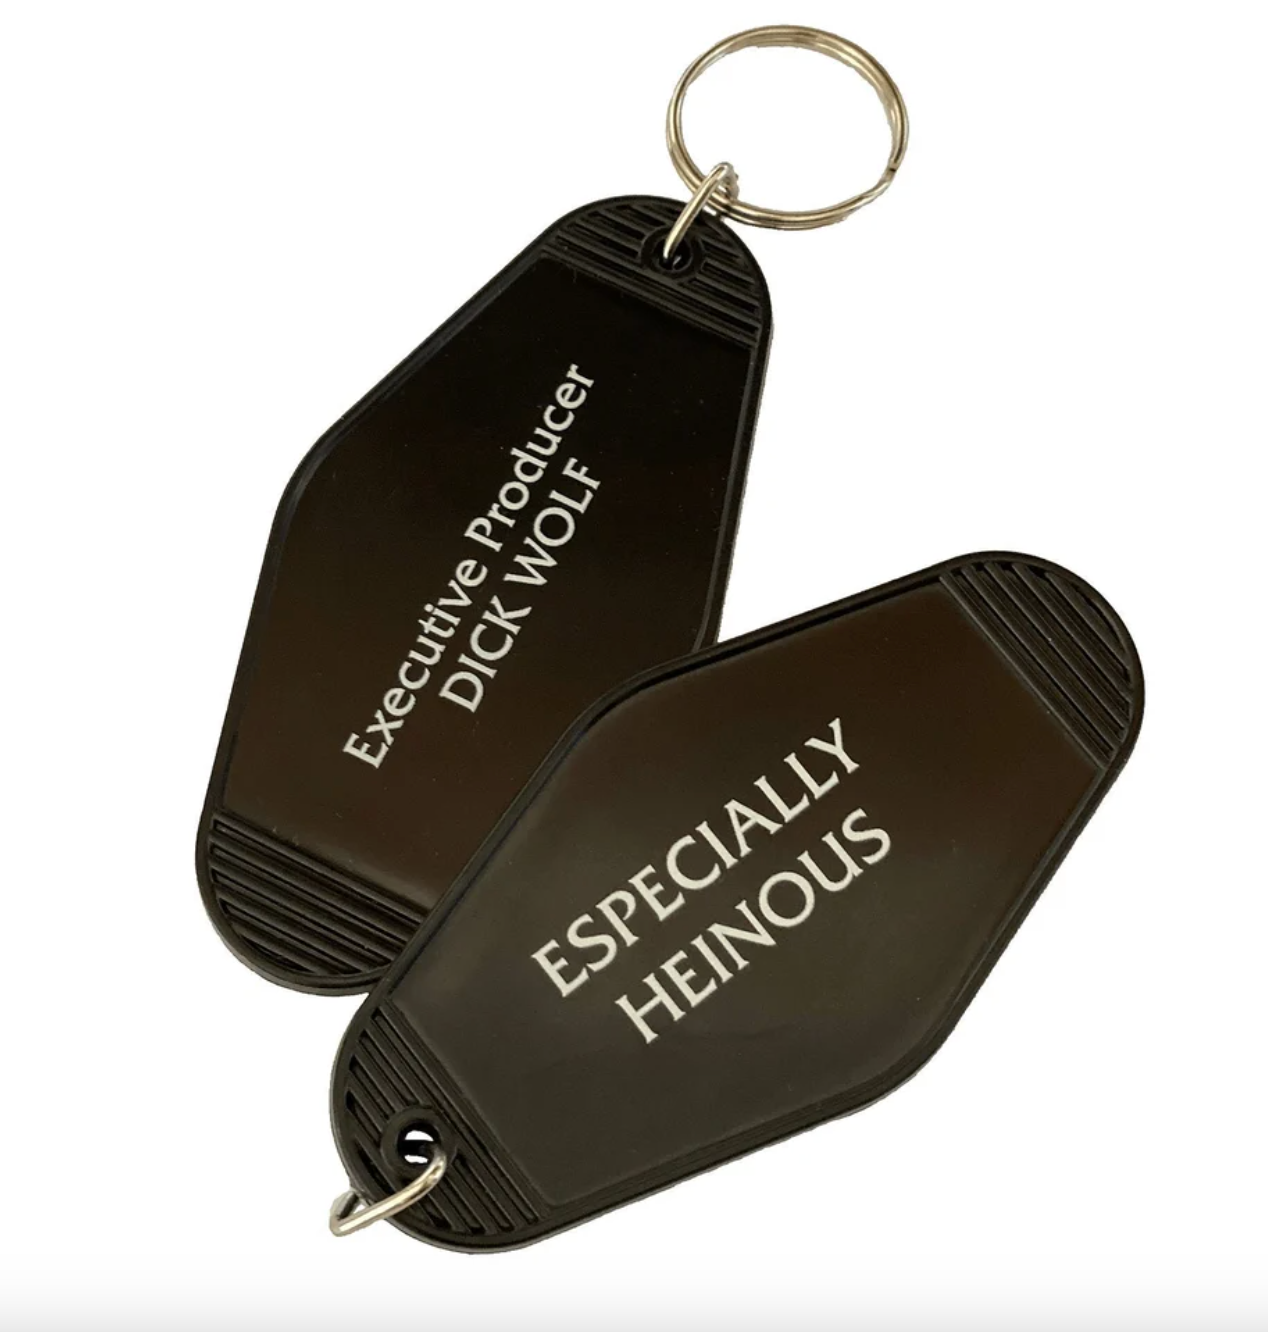 the black keychain which says 